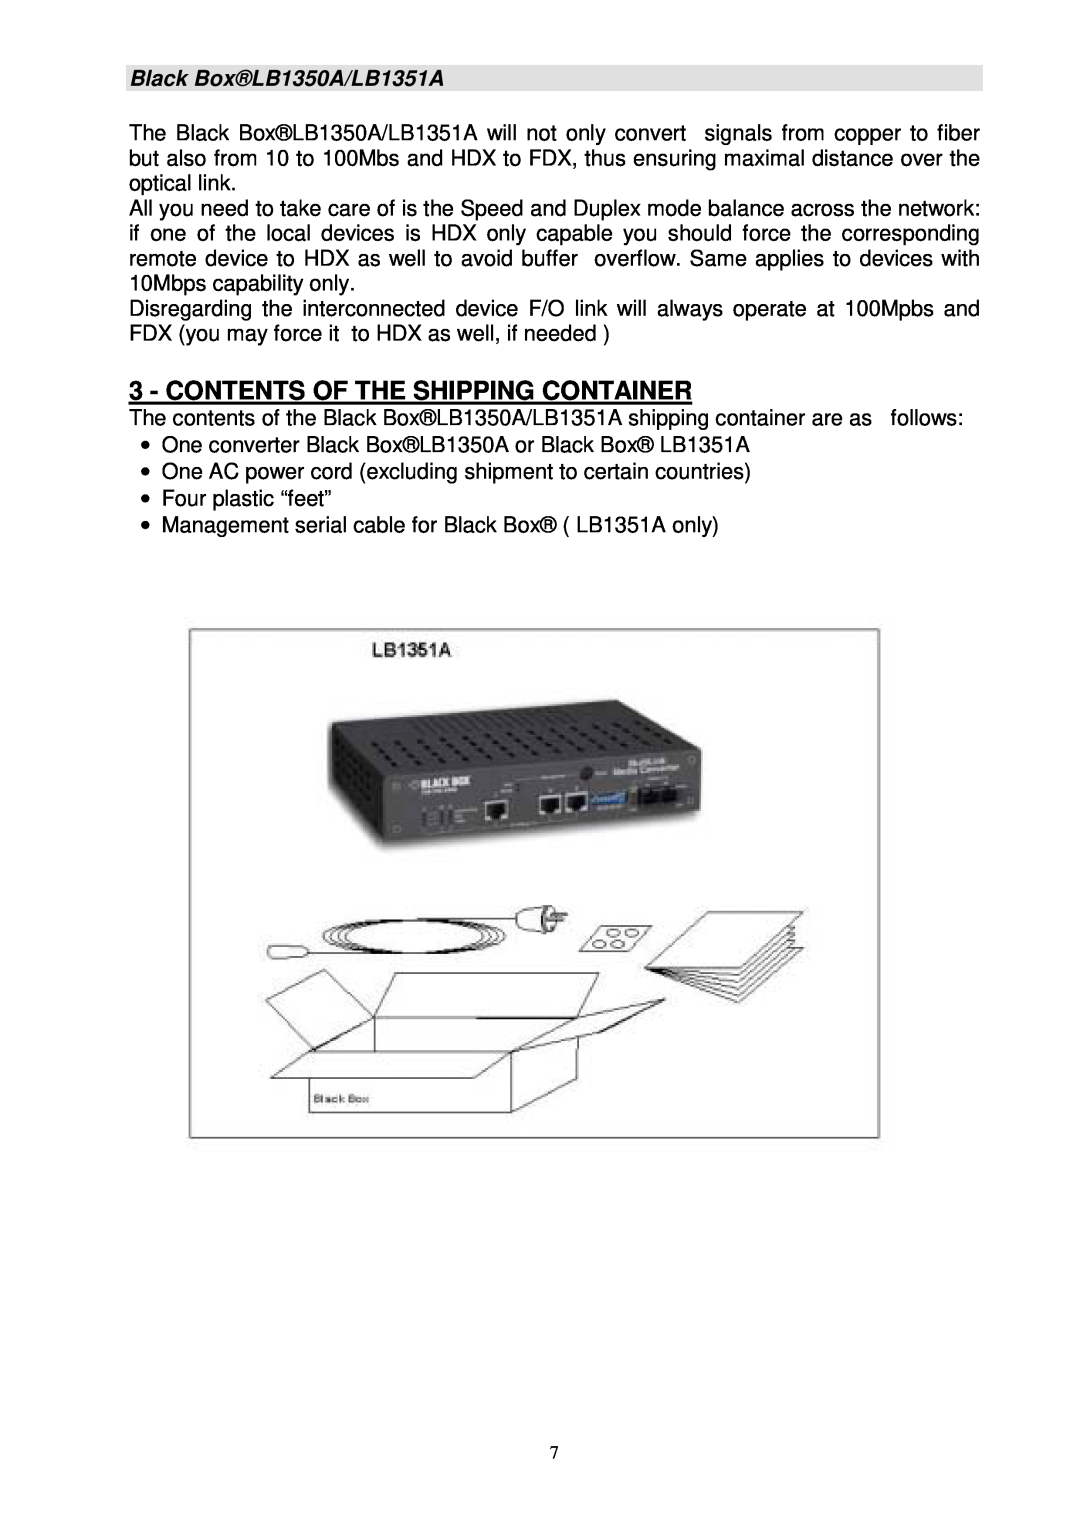 Black Box manual Contents Of The Shipping Container, Black BoxLB1350A/LB1351A 